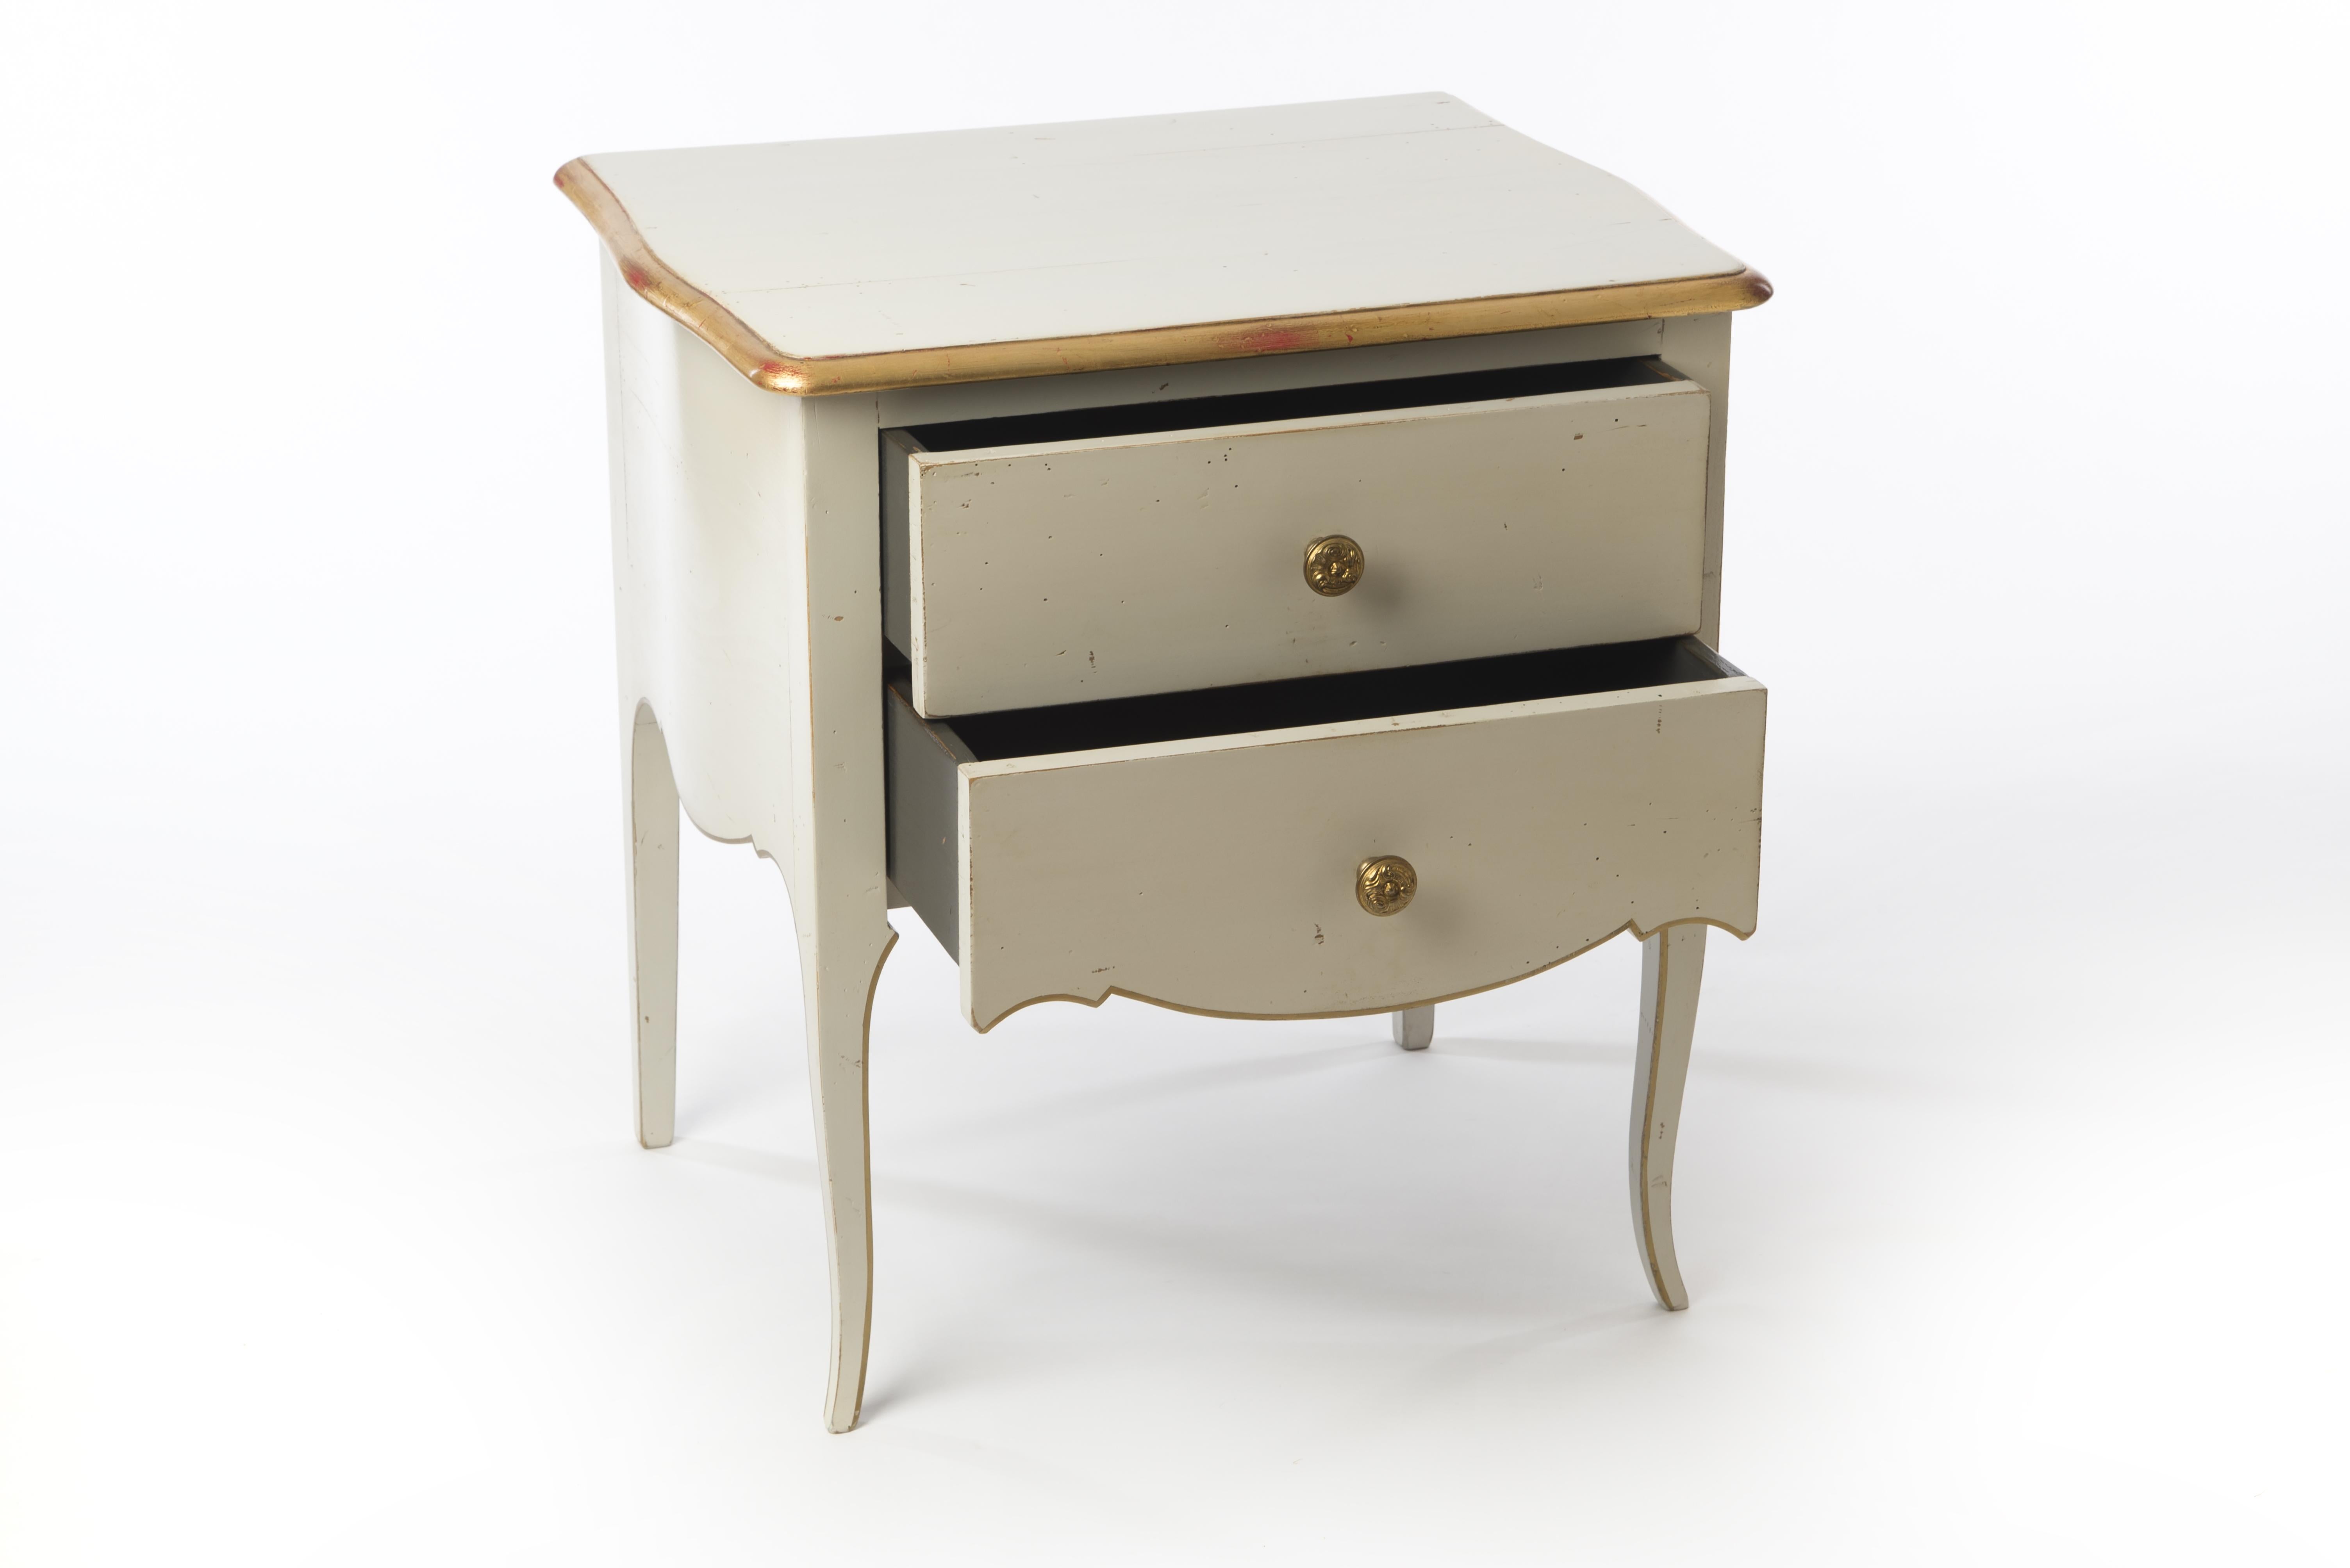 This pair of beautifully designed nightstands in the style of Louis XV are not only pretty but also practical. The size of the nightstands and two drawers make them a useful companion in the bedroom. The bowed sides and bronze handles add charm and